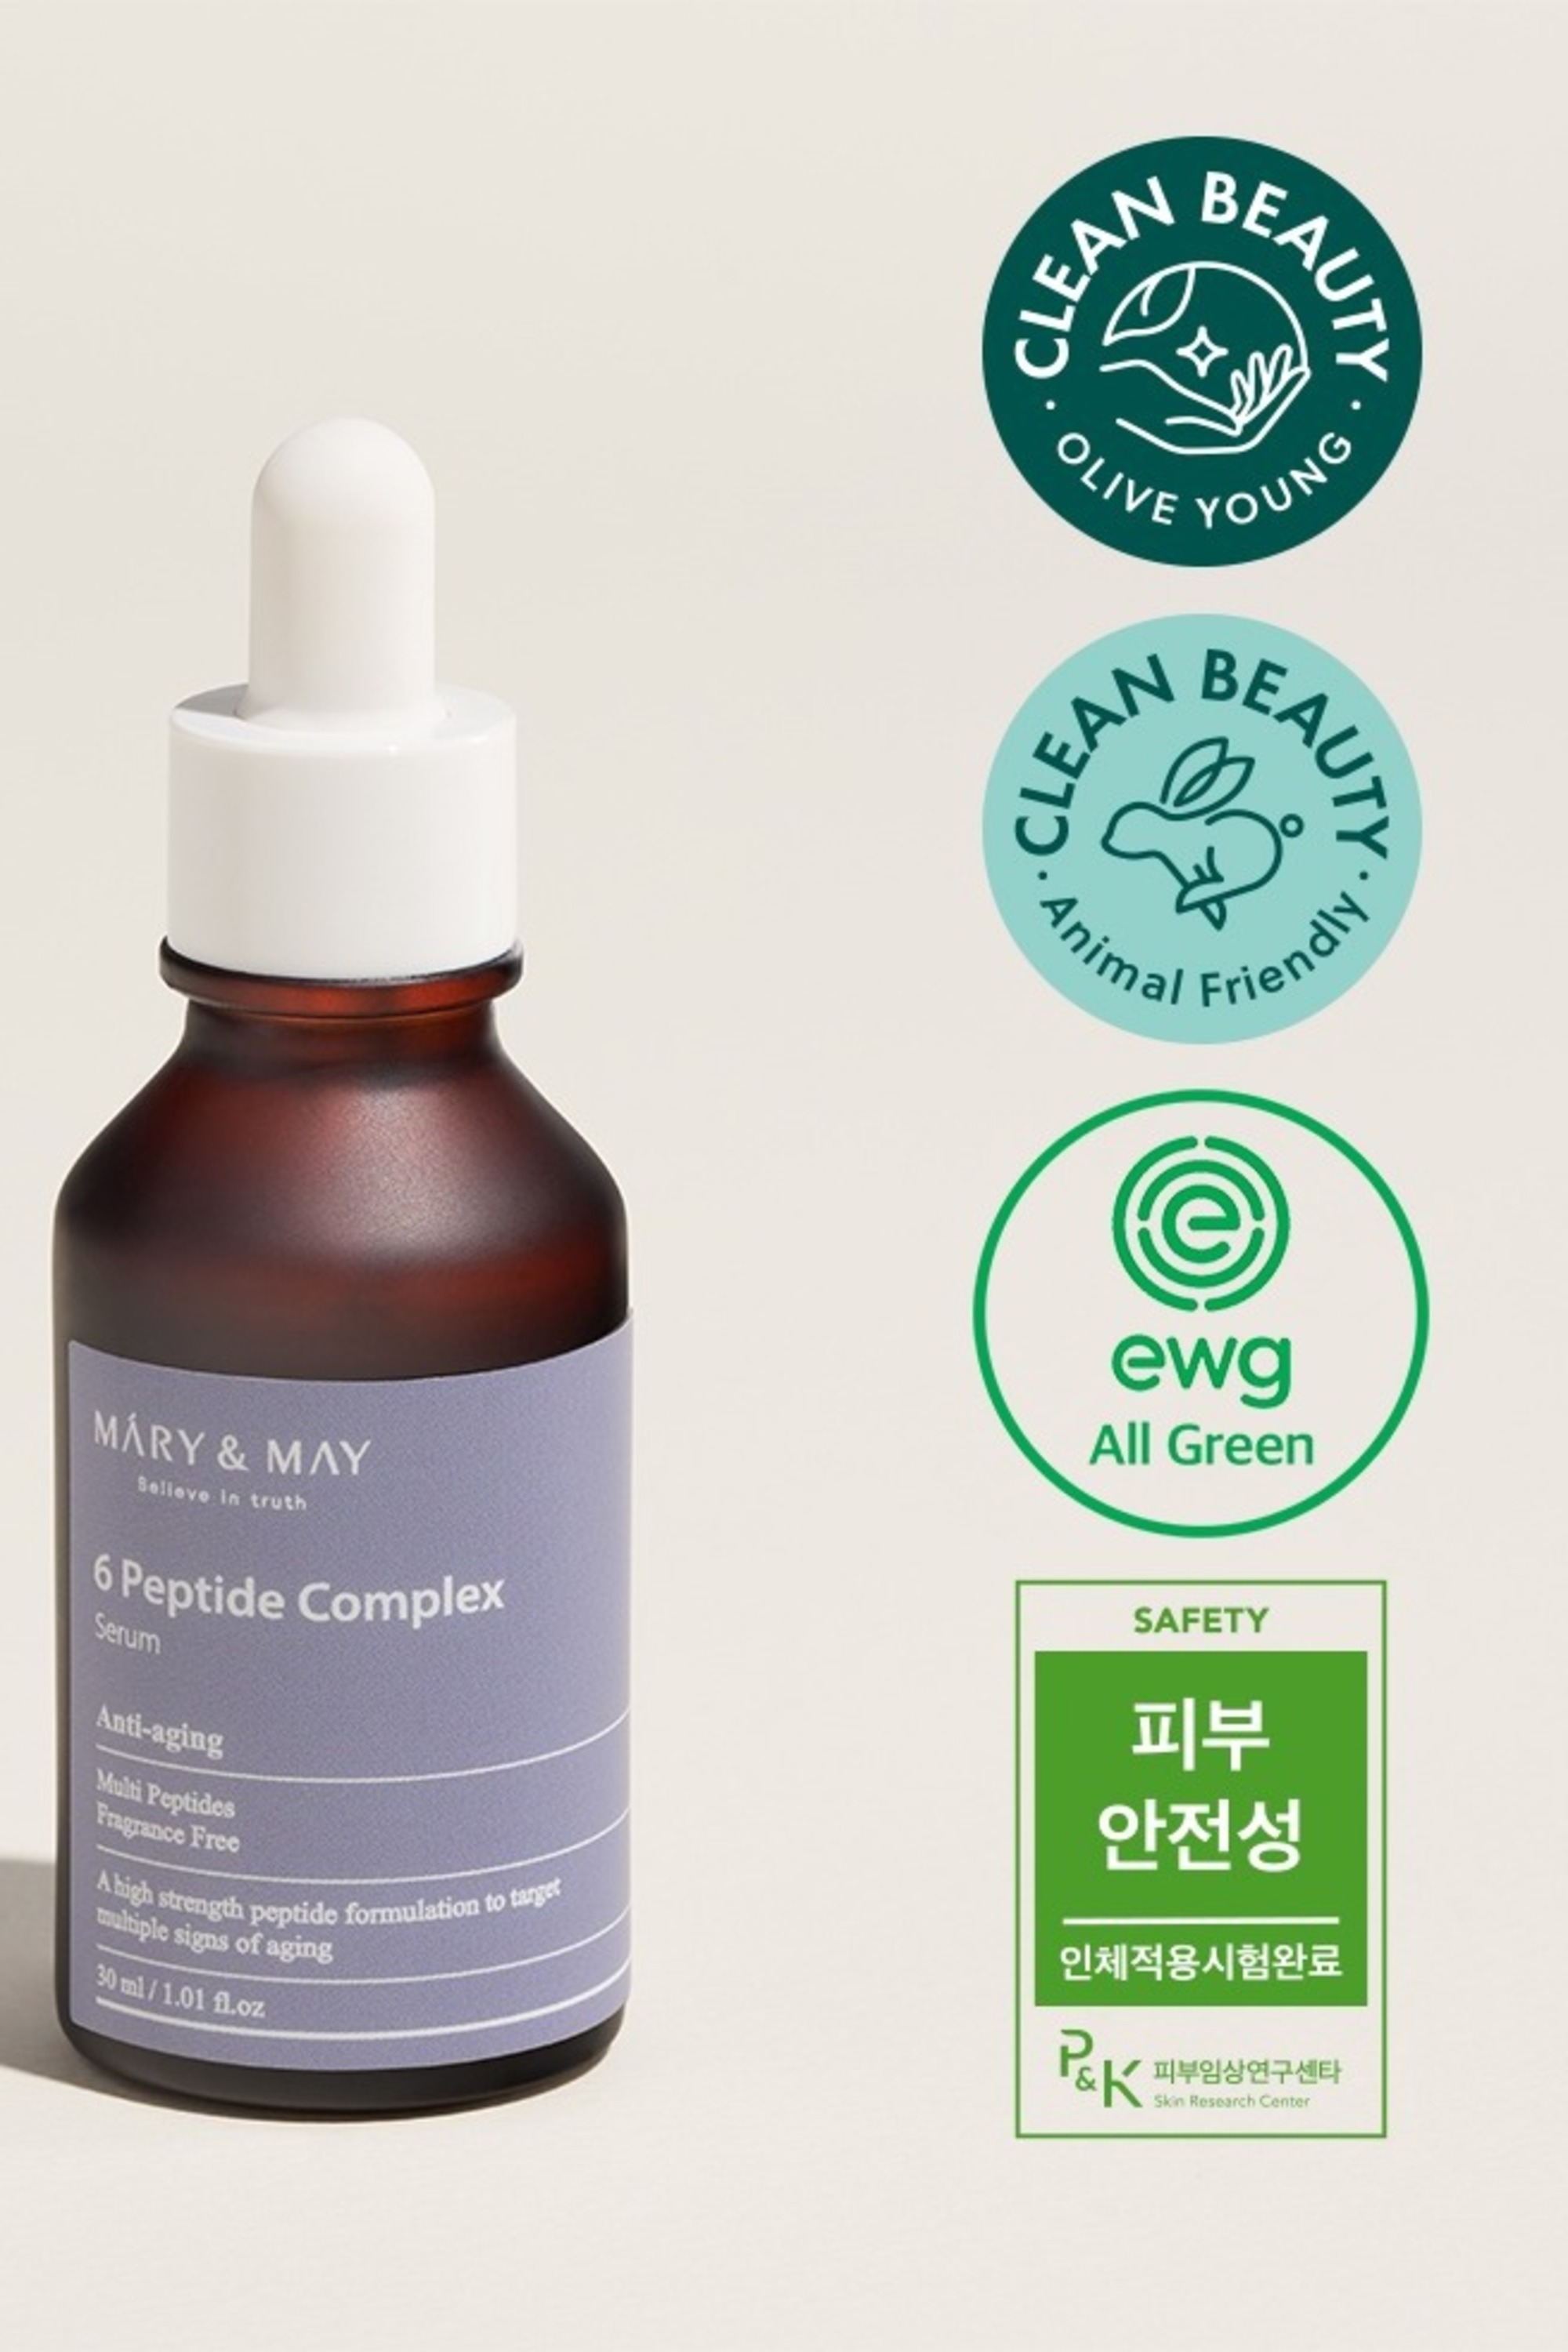  Mary&May 6 Peptide Complex Serum 30ml 